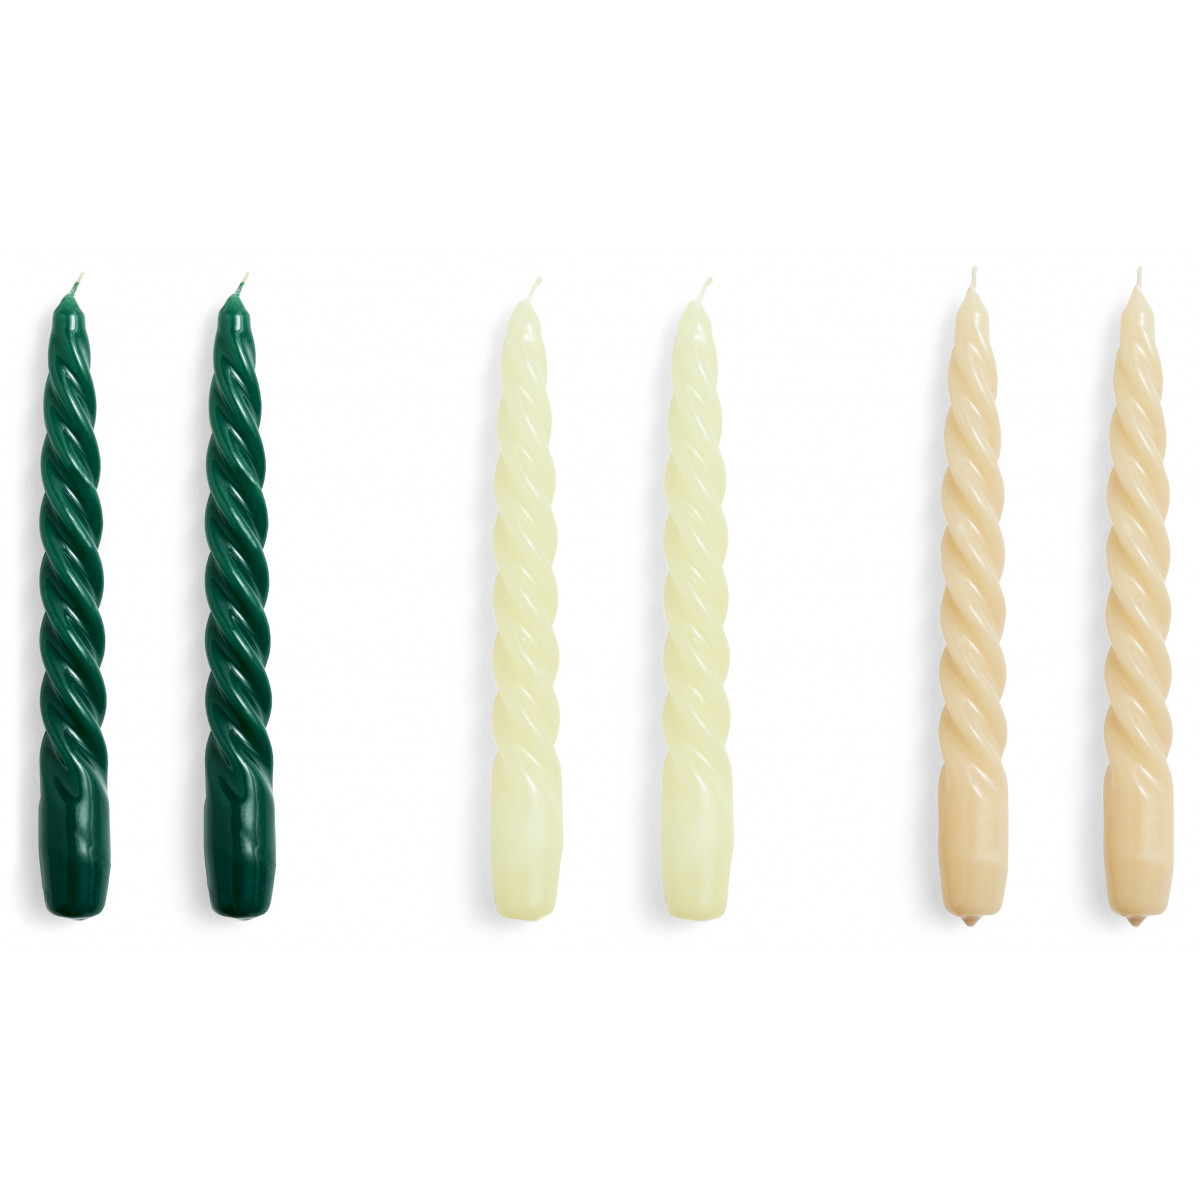 Twist candles set of 6 - green, citrus and beige